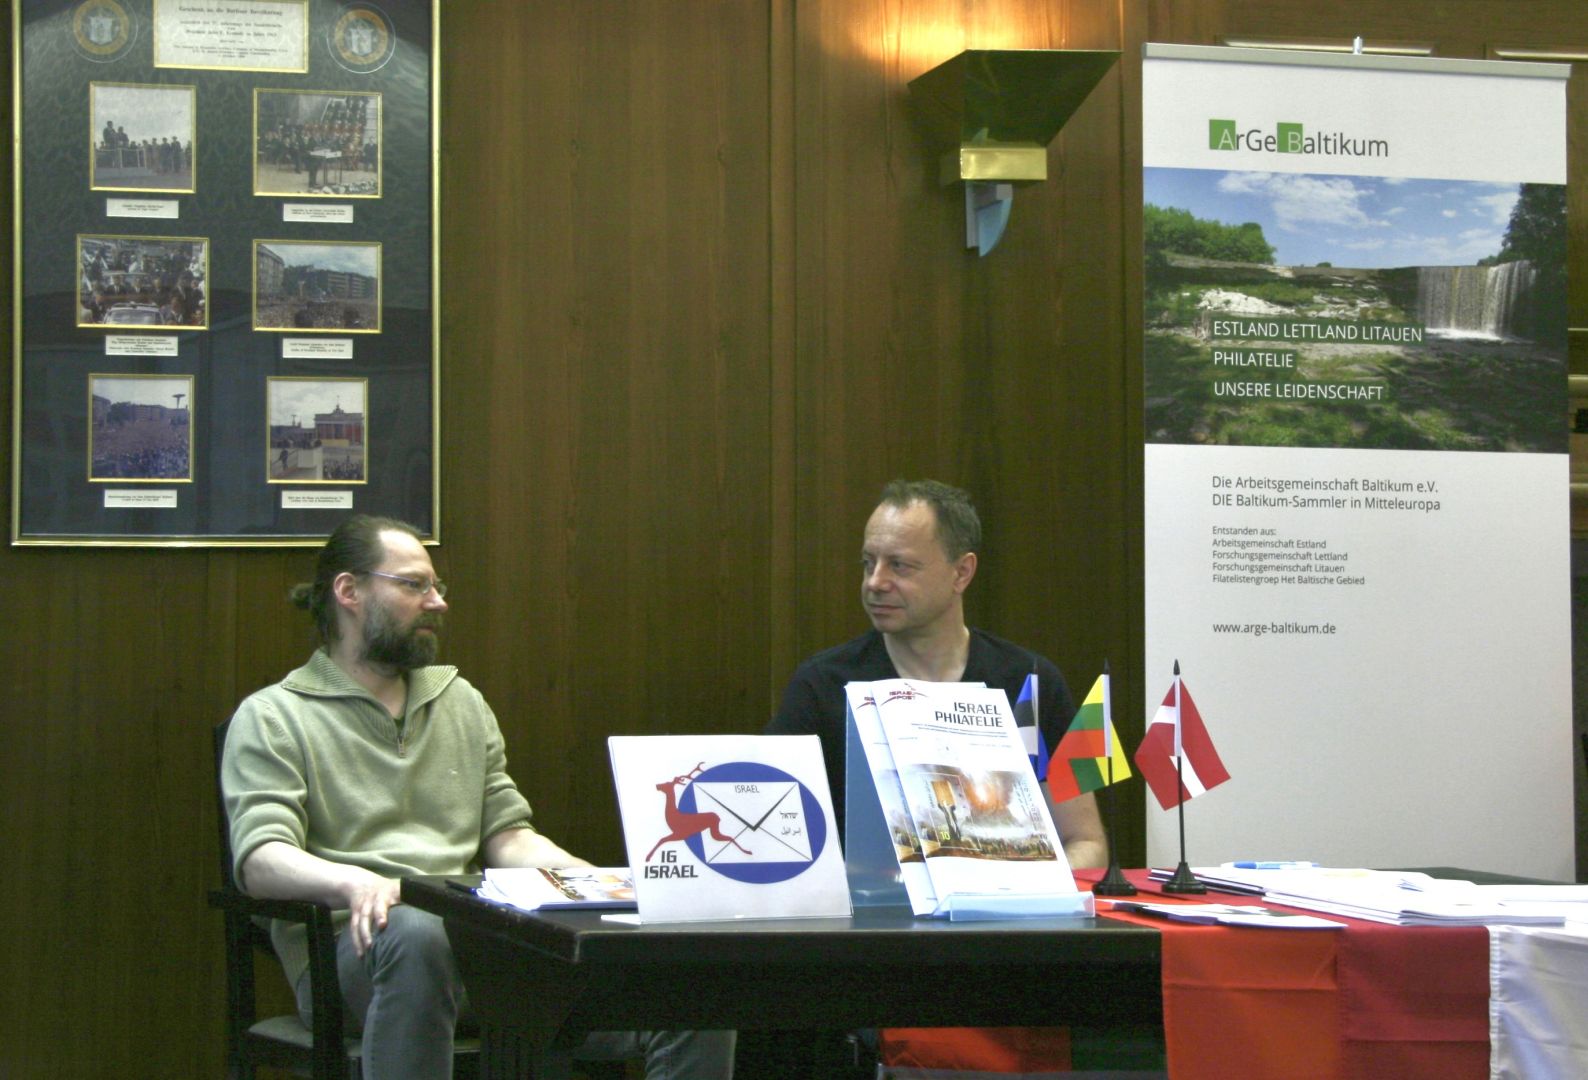 Christoph Wendland and Michael Haslau at the information stand